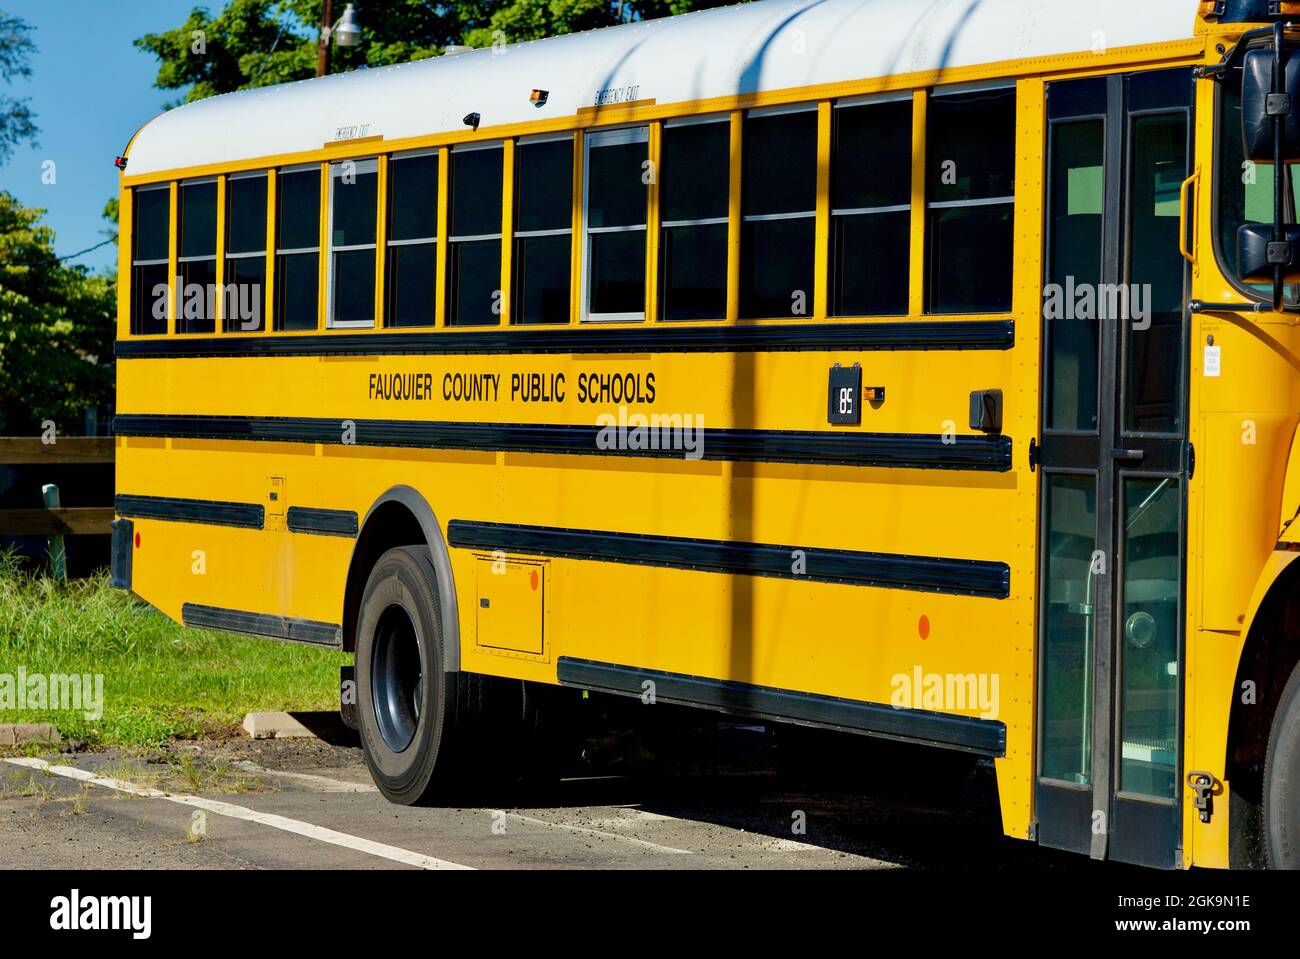 Marshall, Virginia, USA - September 3, 2021: Empty Fauquier County Public Schools busses parked near an elementary school sit vacant. Stock Photo